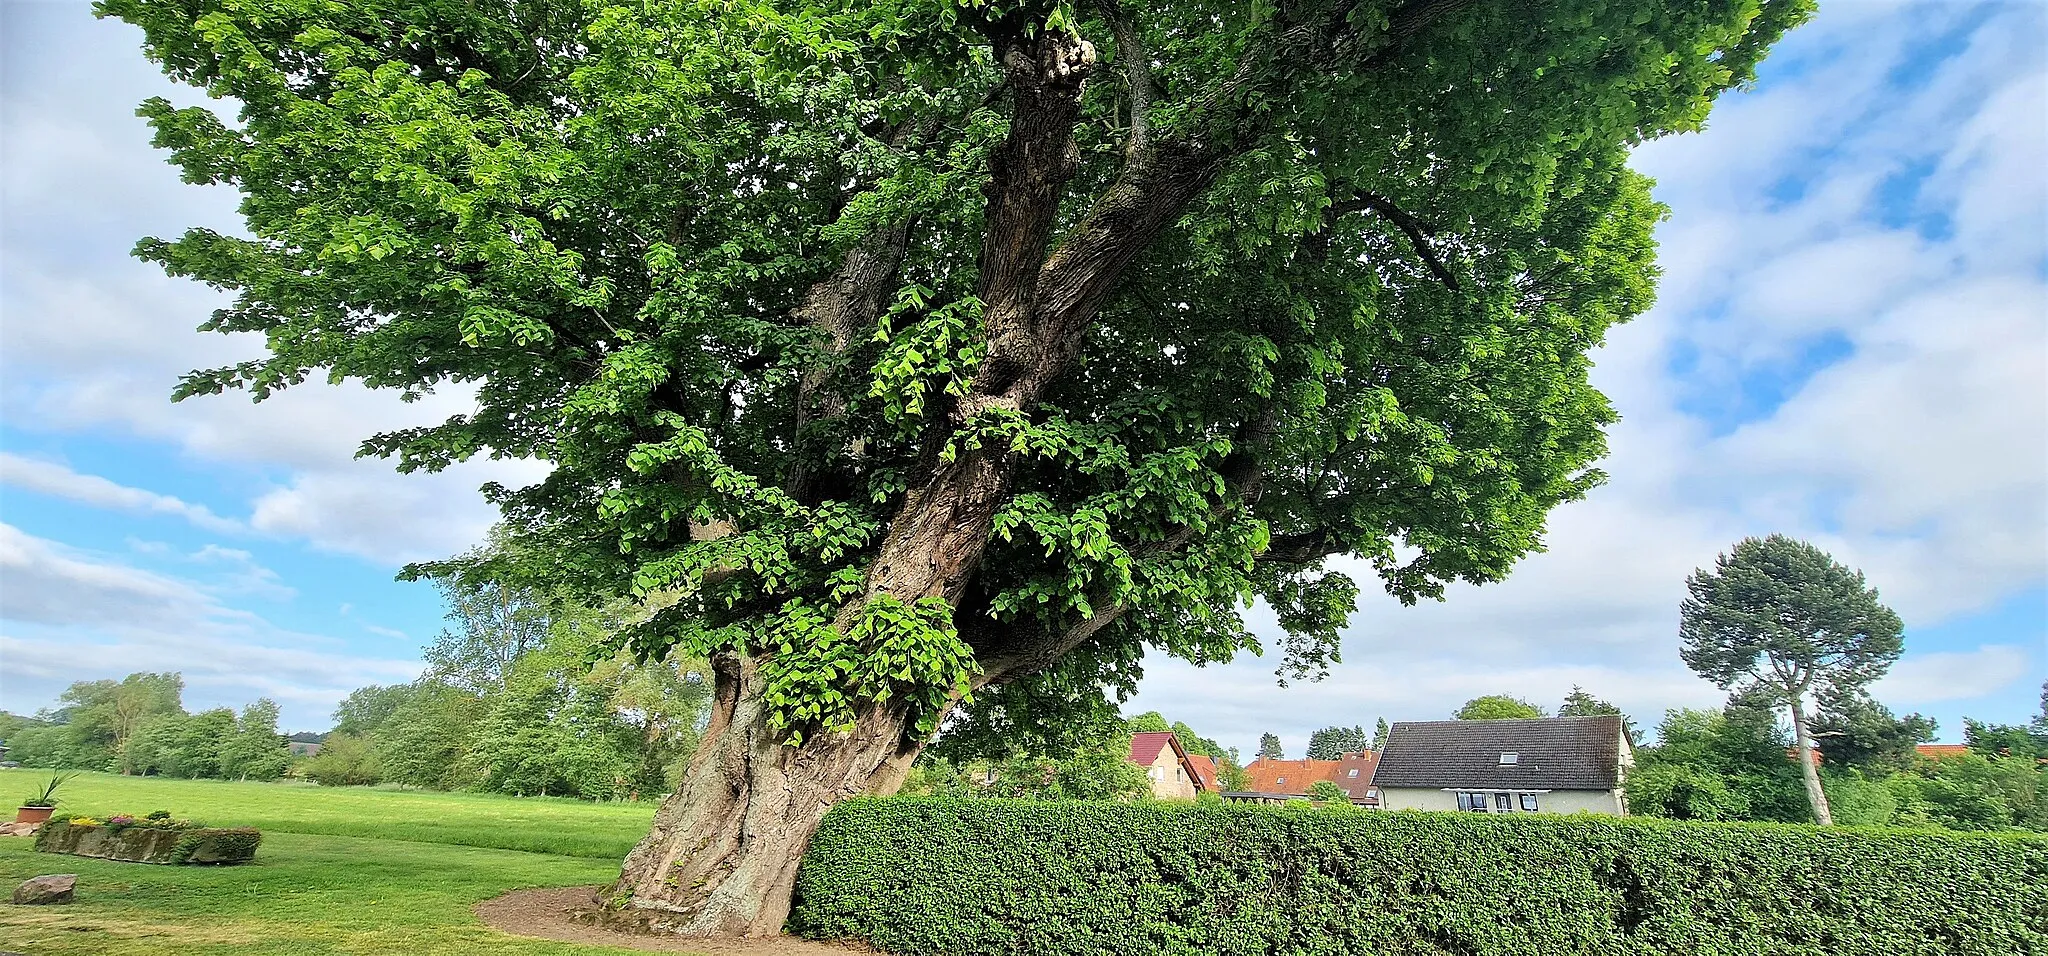 Photo showing: Linden tree "Big Linde" in Varlosen, Dransfeld in the district of Göttingen.
The gnarled small-leaved linden tree is a special feature due to its age and appearance. This linden tree was already mentioned in the 16th century.